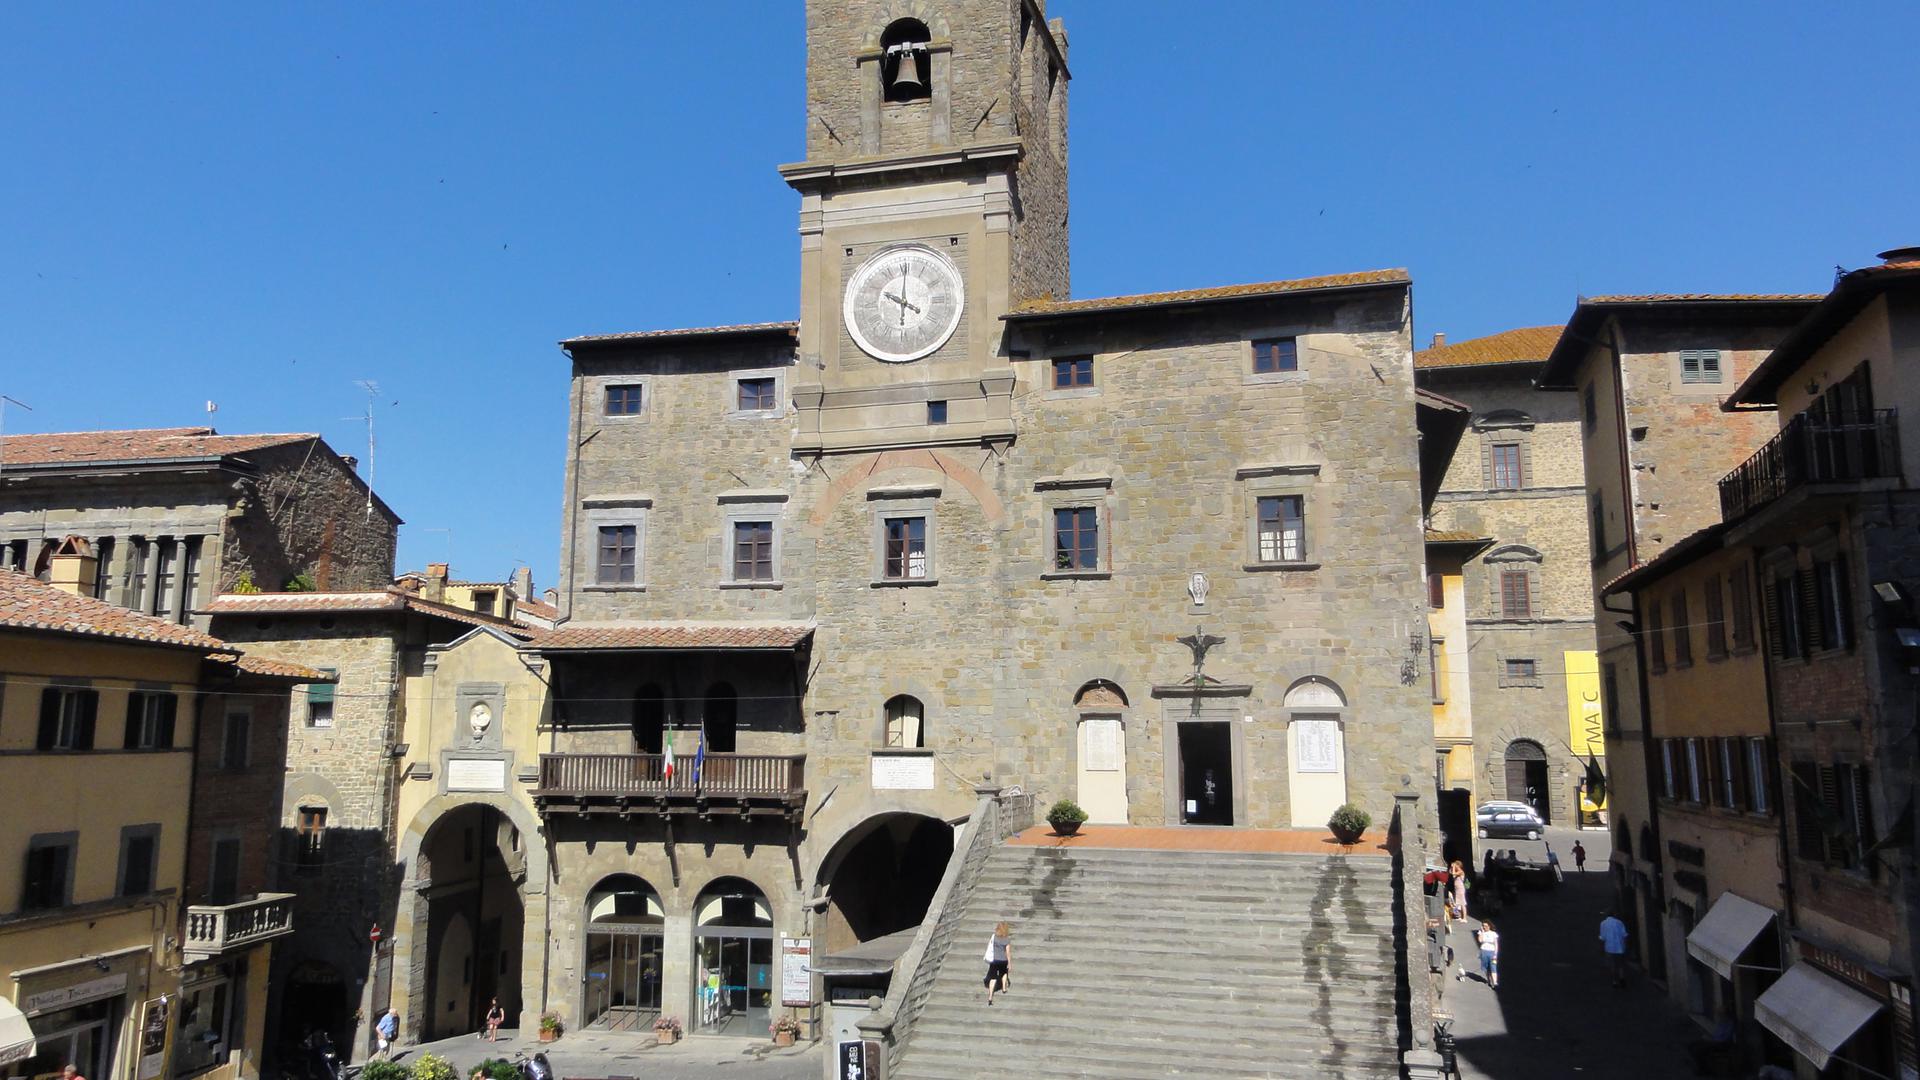 What to do in Cortona, Tuscany | Old town tour